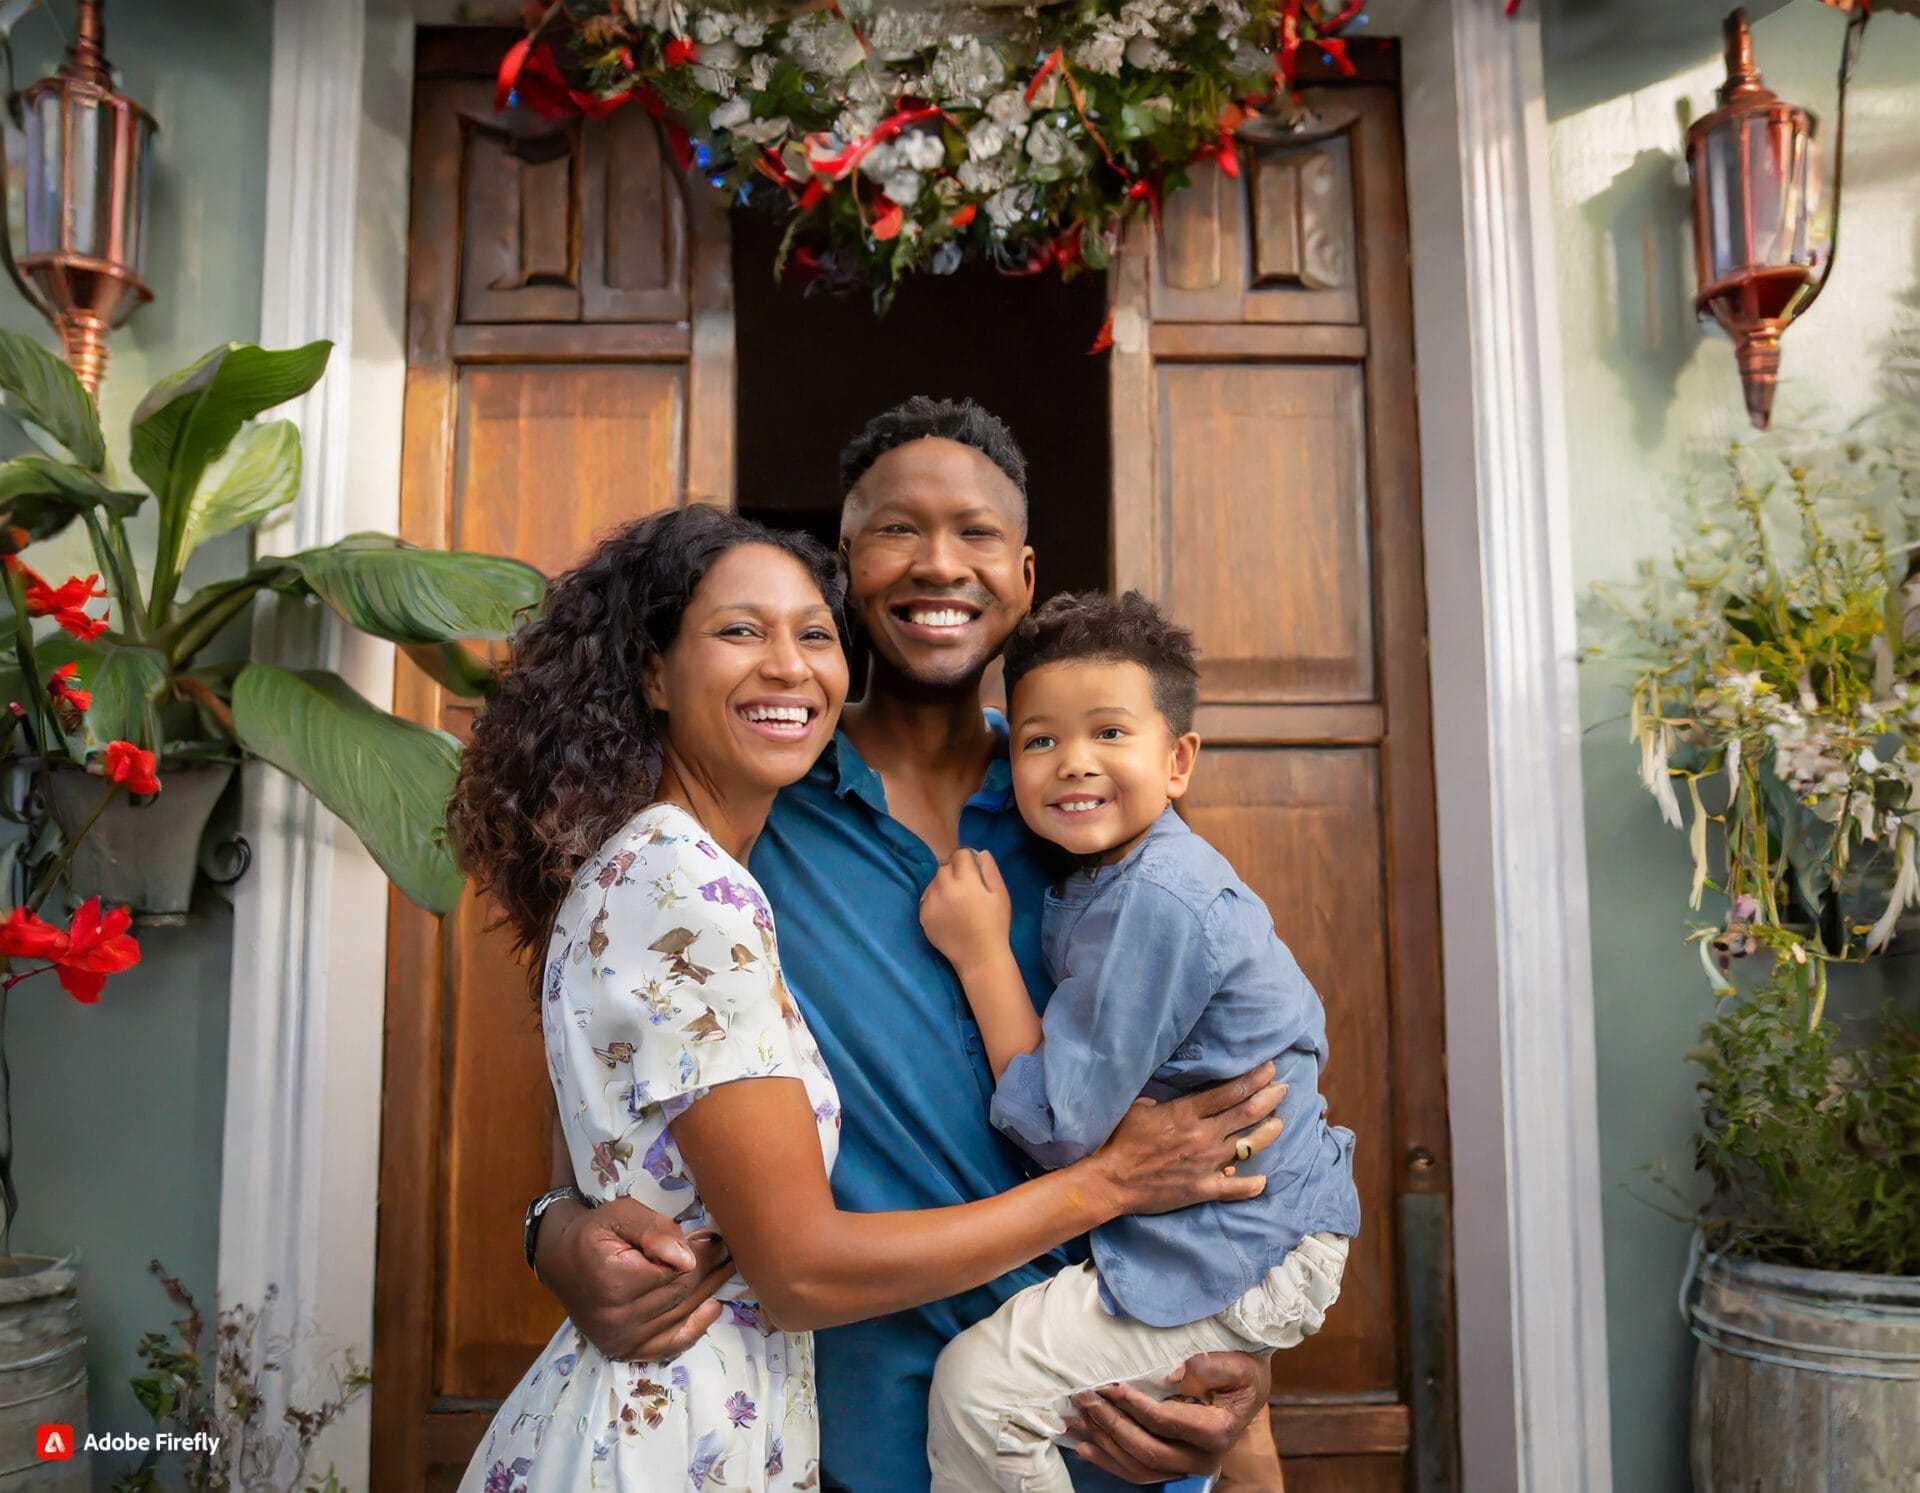 In this heartwarming image, a family, eager to demonstrate various ways to say 'welcome home,' lovingly embraces their returning member at the front door. The beautifully decorated entrance sets the stage for a warm and creative welcome, illustrating the importance of diverse expressions when welcoming someone back home.